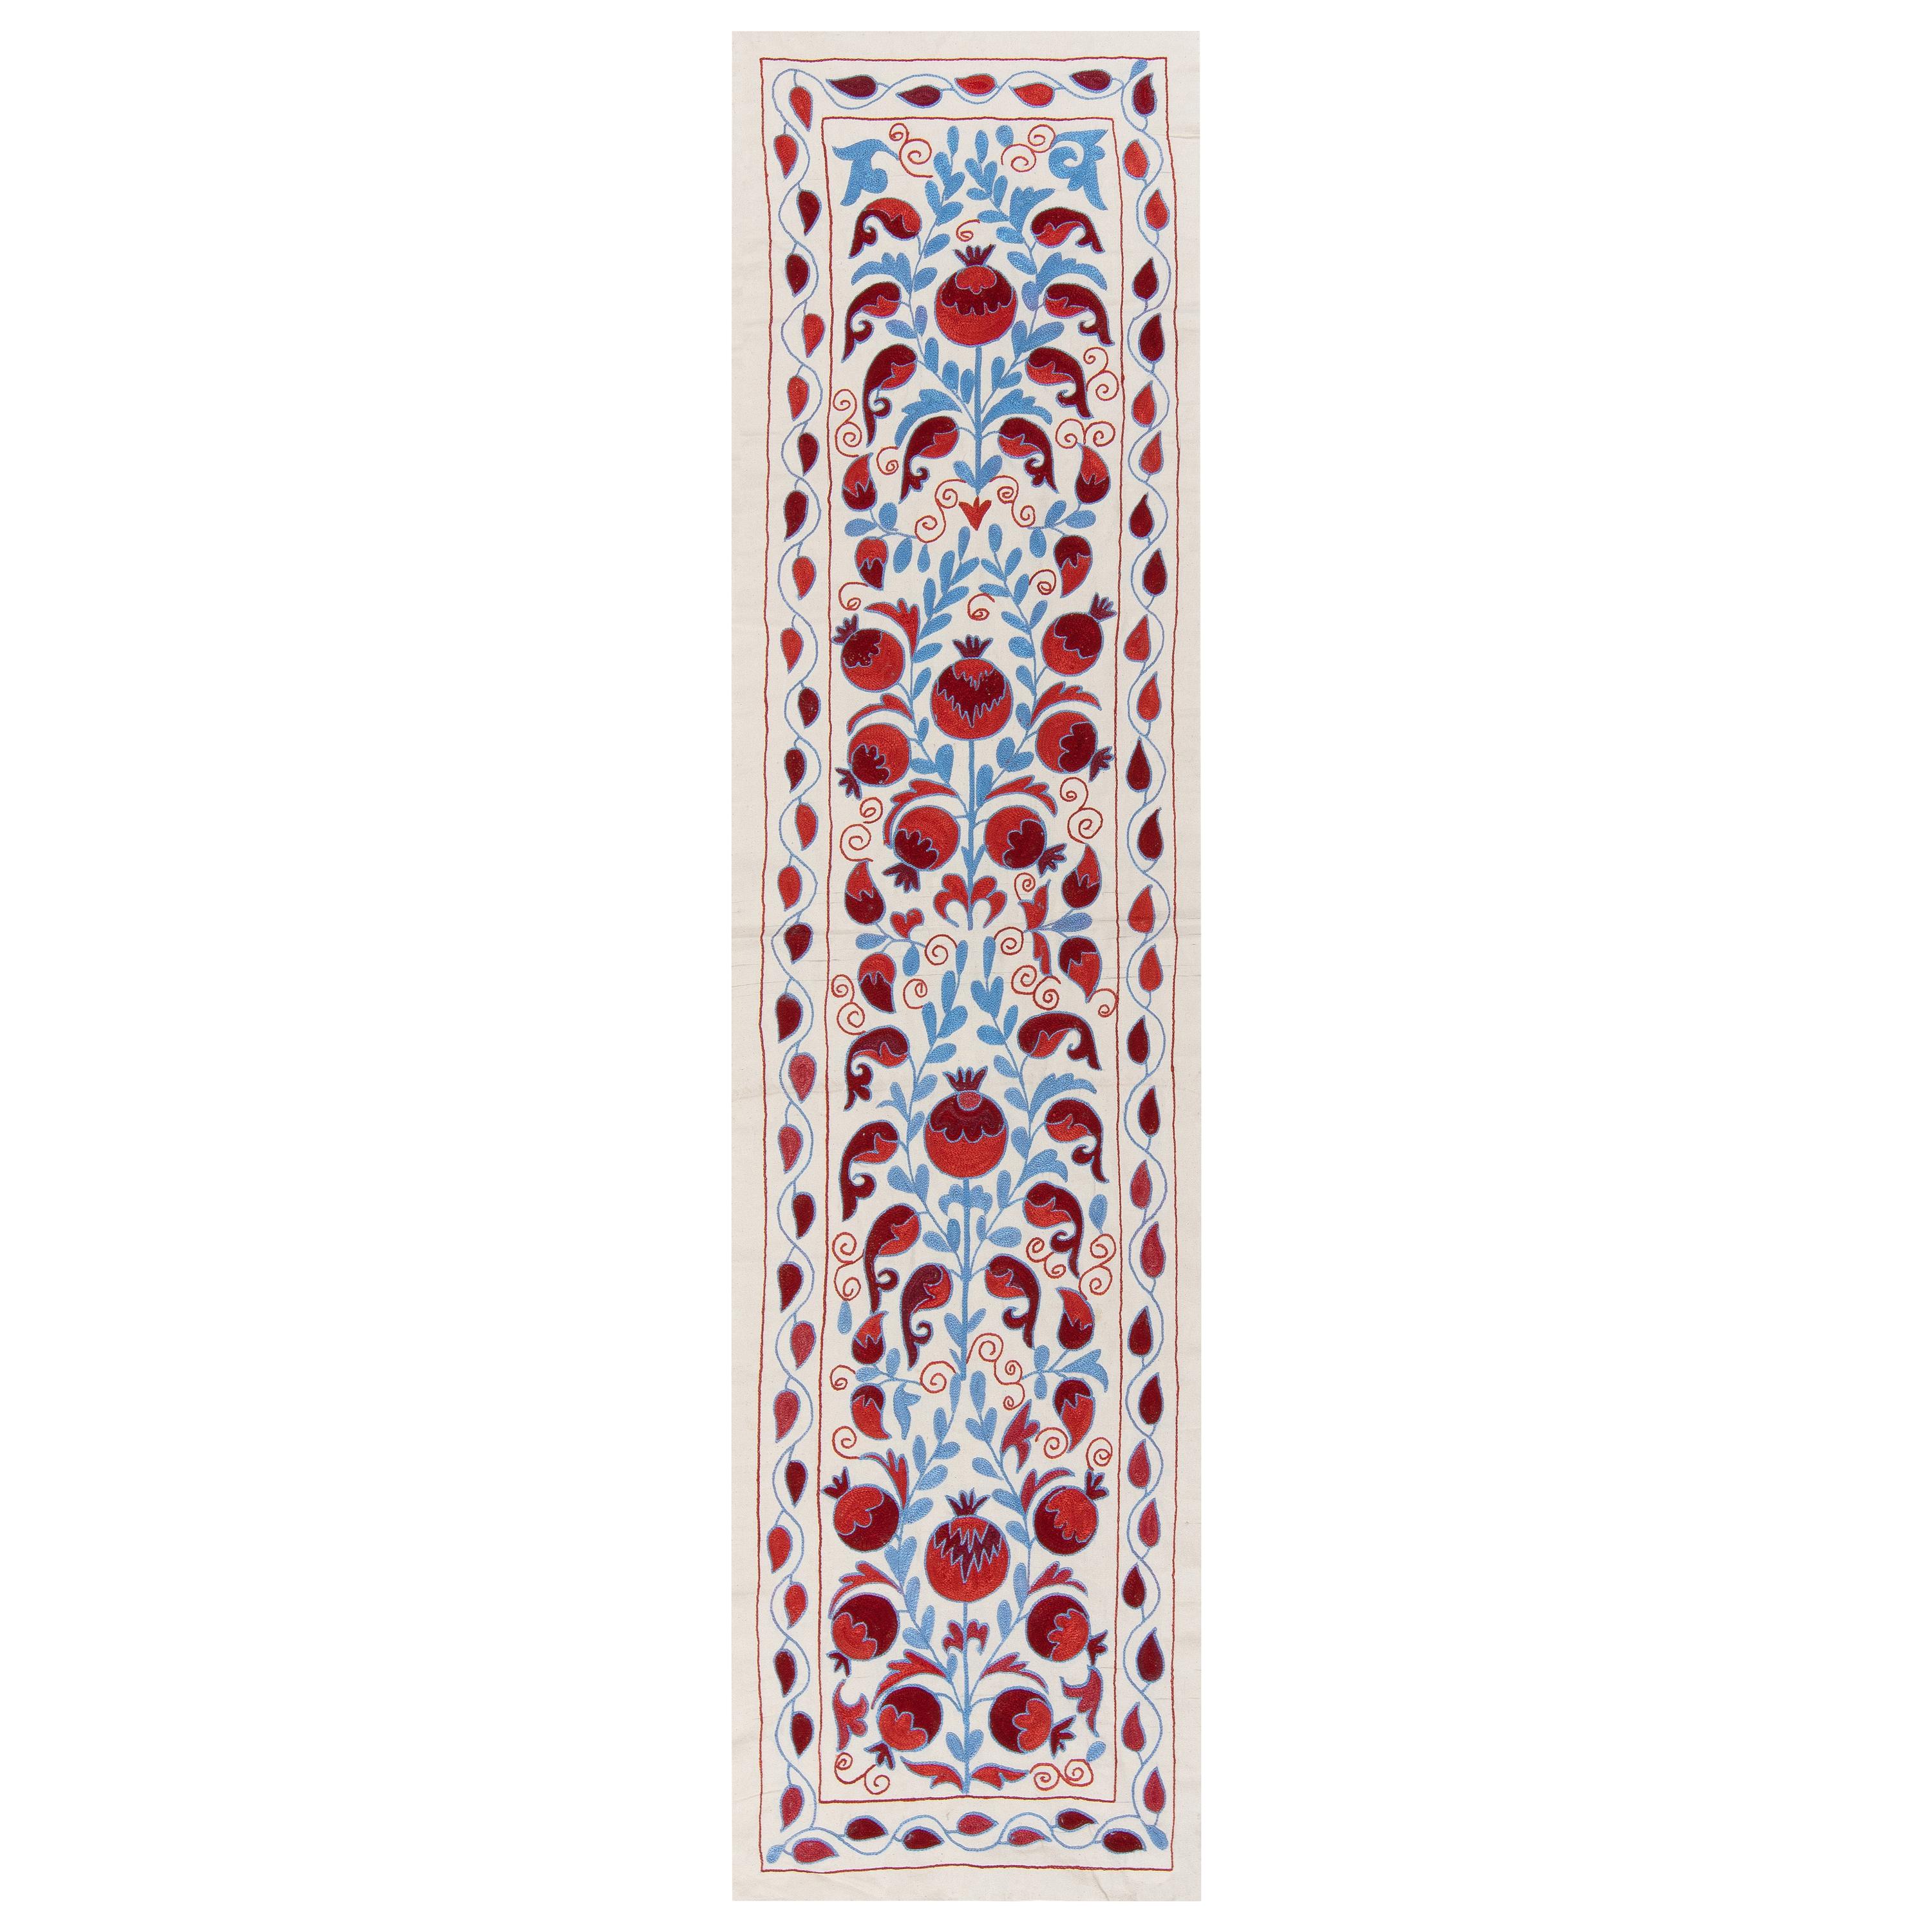 1.7x6.3 Ft Silk Embroidery Table Runner, Uzbek Wall Hanging in Red, Cream & Blue For Sale